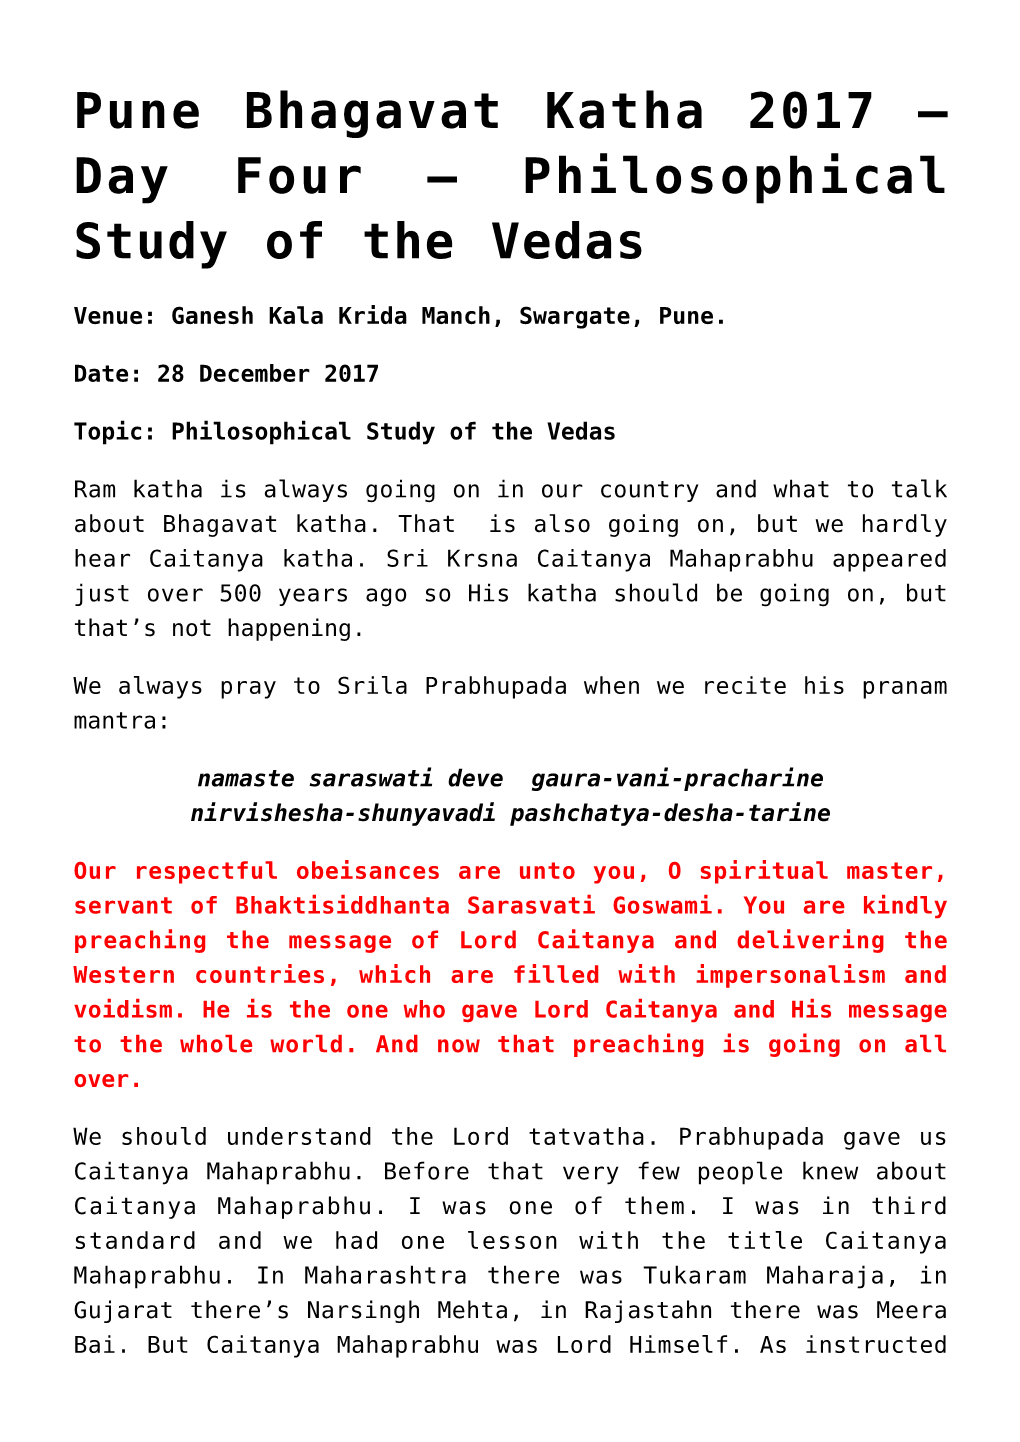 Philosophical Study of the Vedas